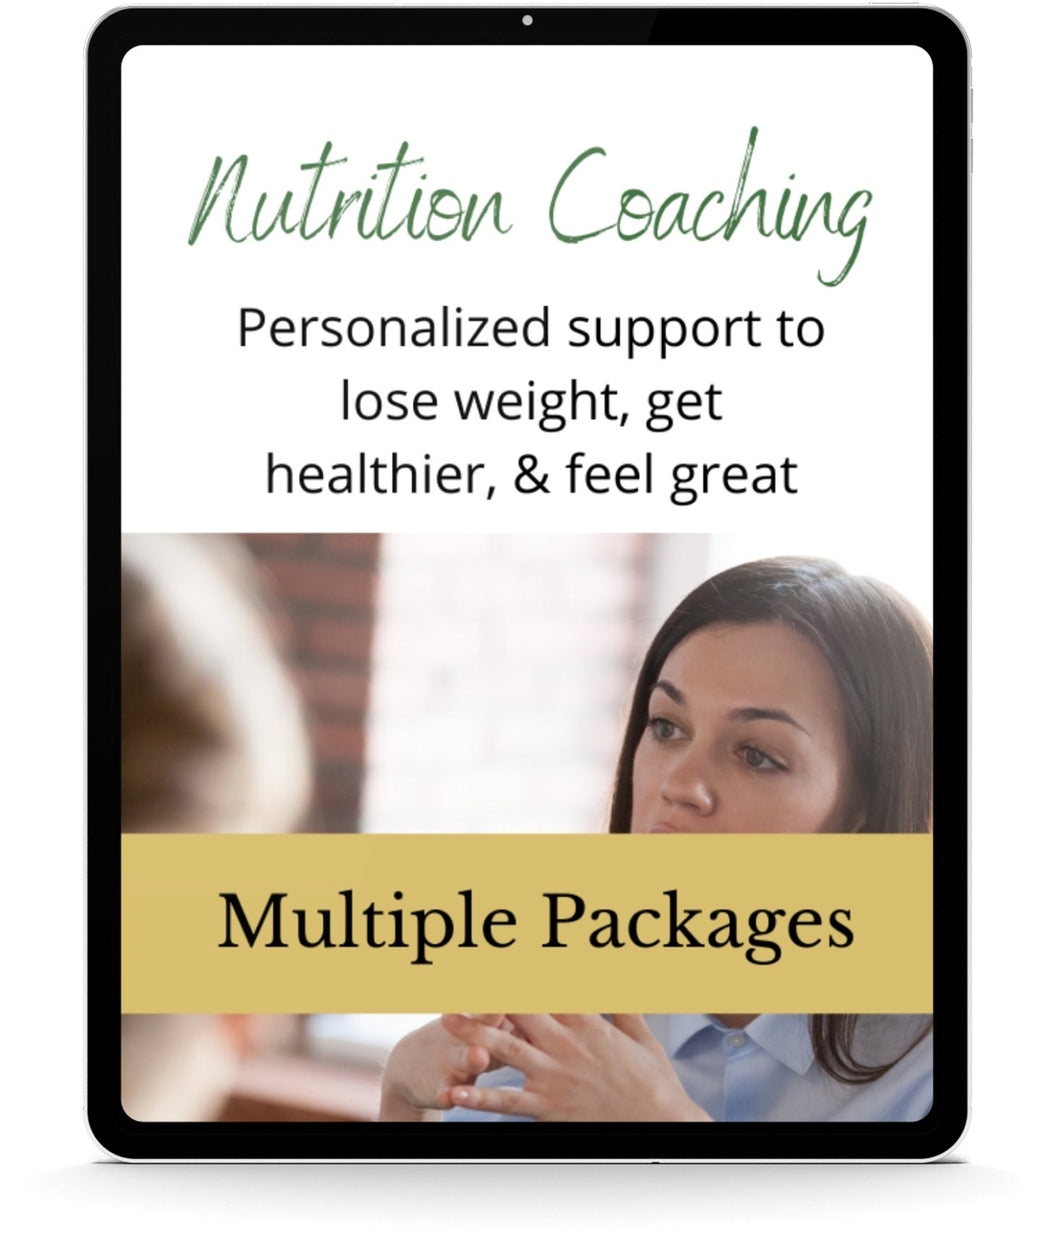 Nutrition Coaching Services